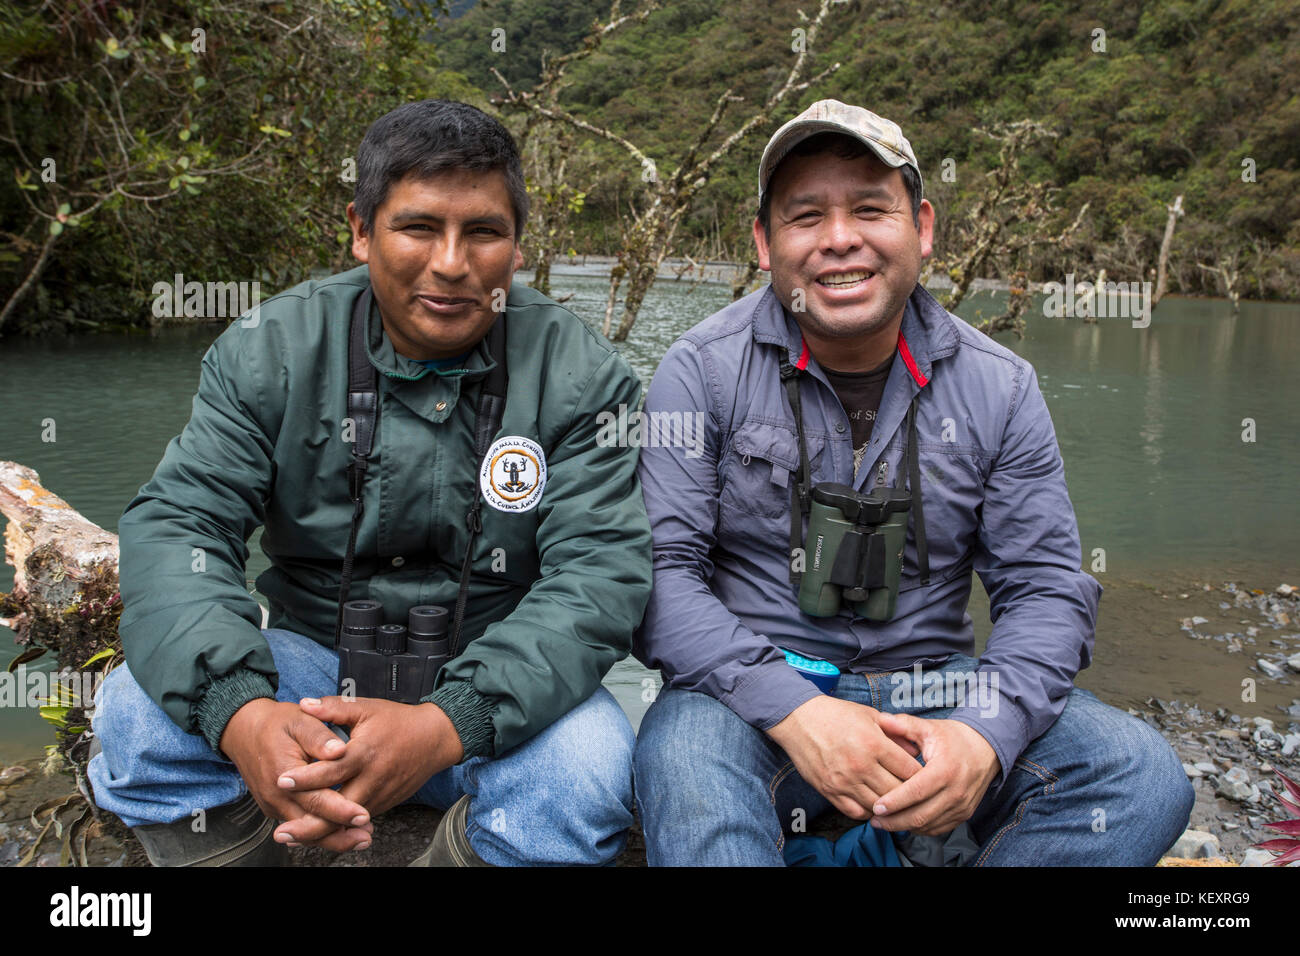 Two local guides posing for picture in Peru's Cloud Forest, based out of Wayqecha Biological Research Station, while hiking through rainforest Stock Photo